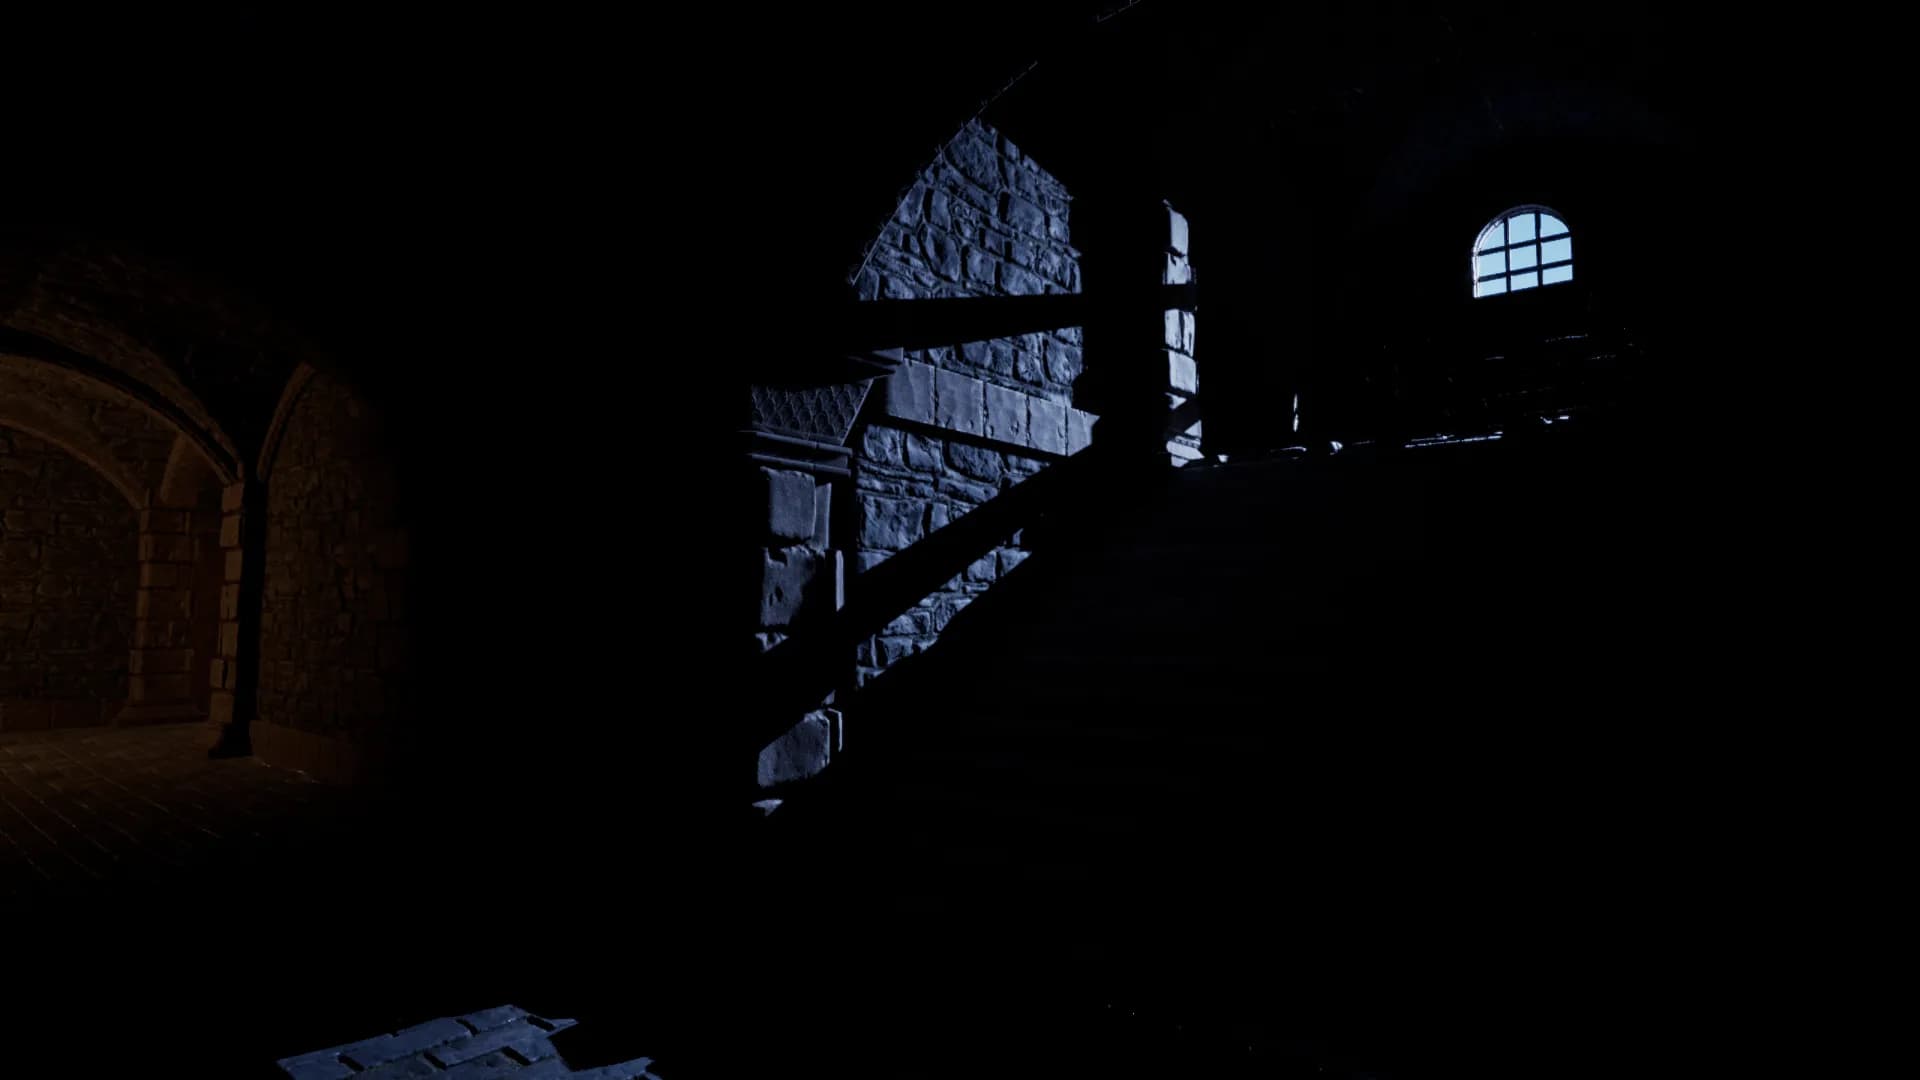 Screenshot 2: Stairs to the crypt illuminated by light from the window